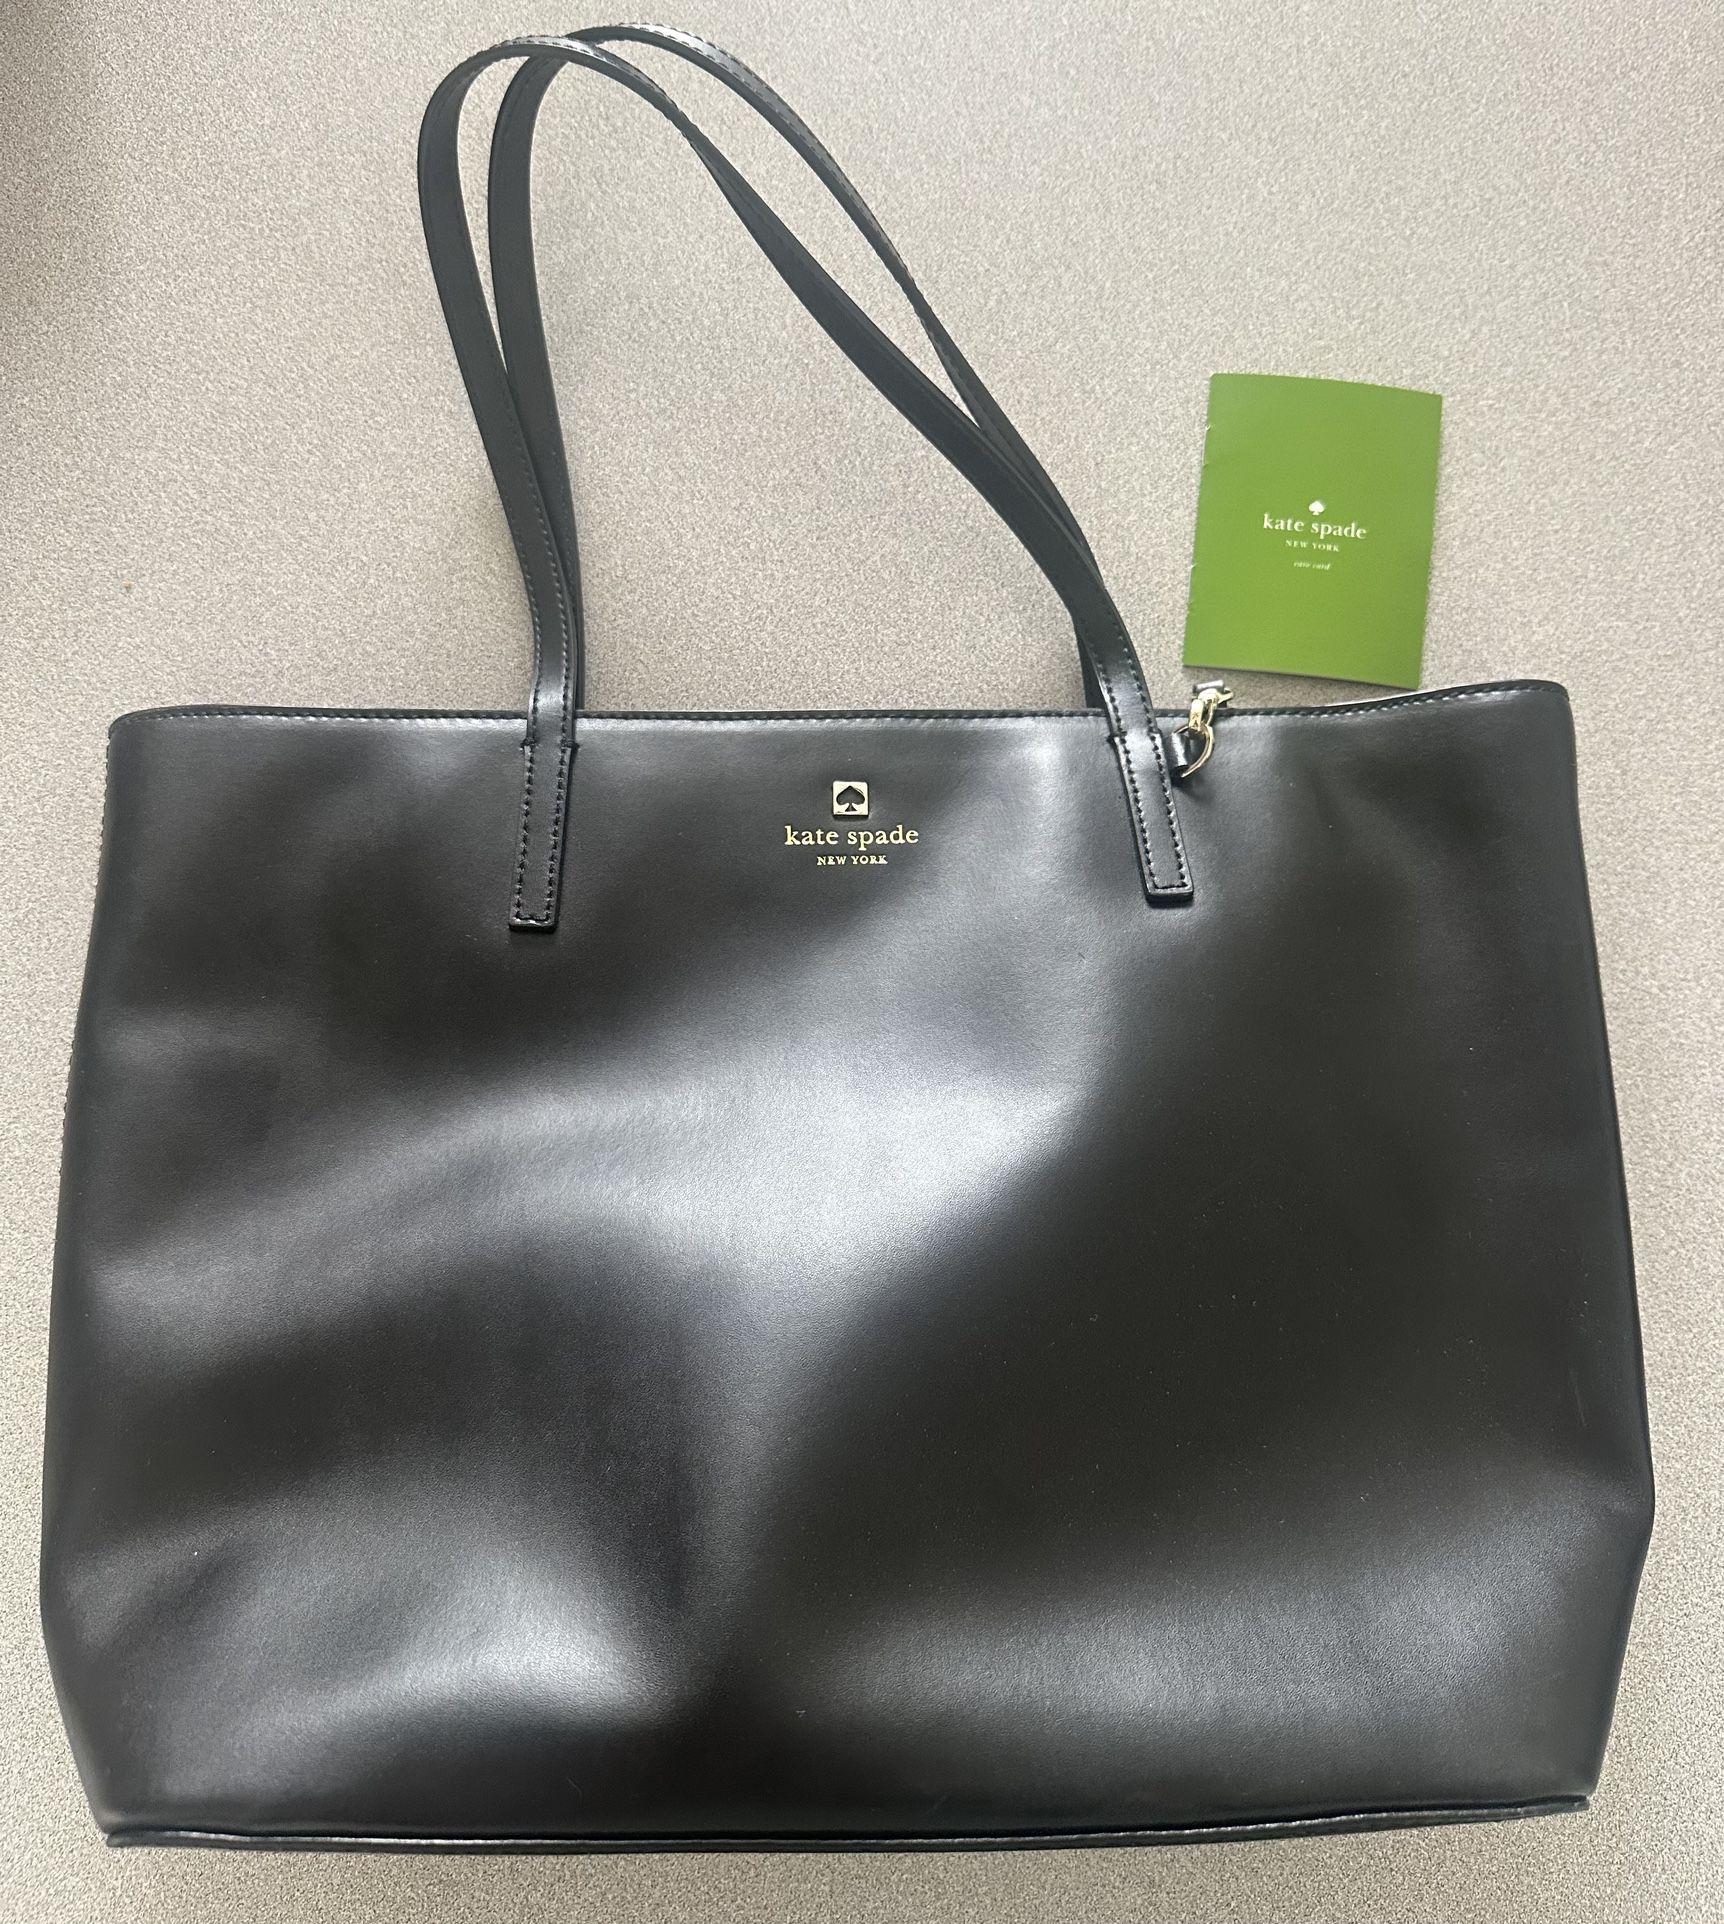 Kate Spade Black Leather Bag New Without Box